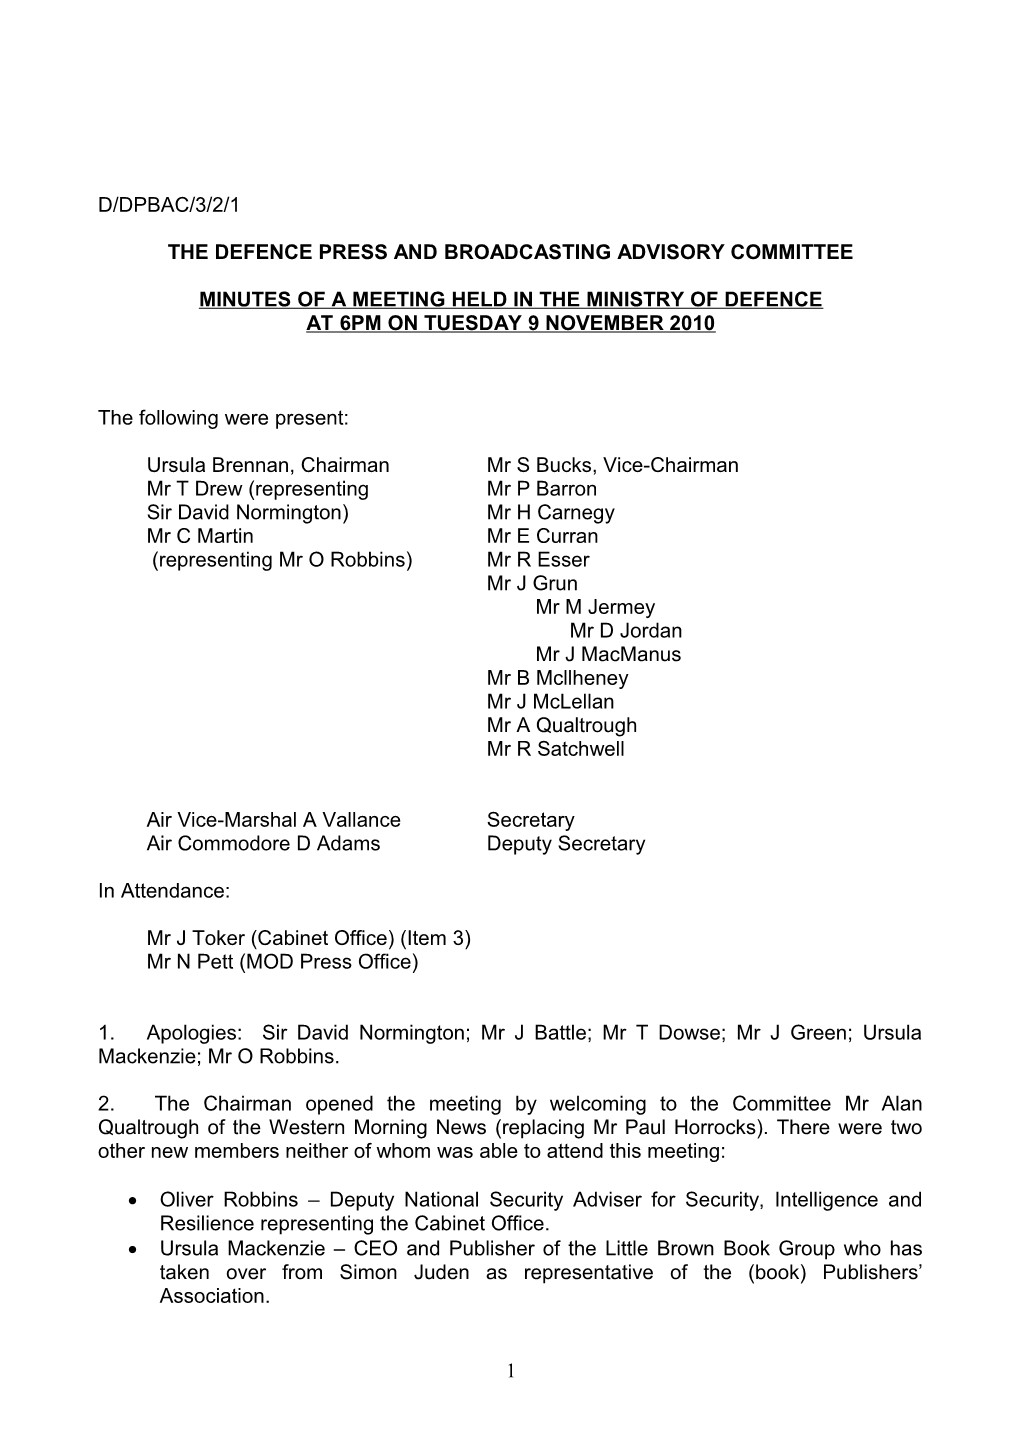 The Defencepress and Broadcasting Advisory Committee